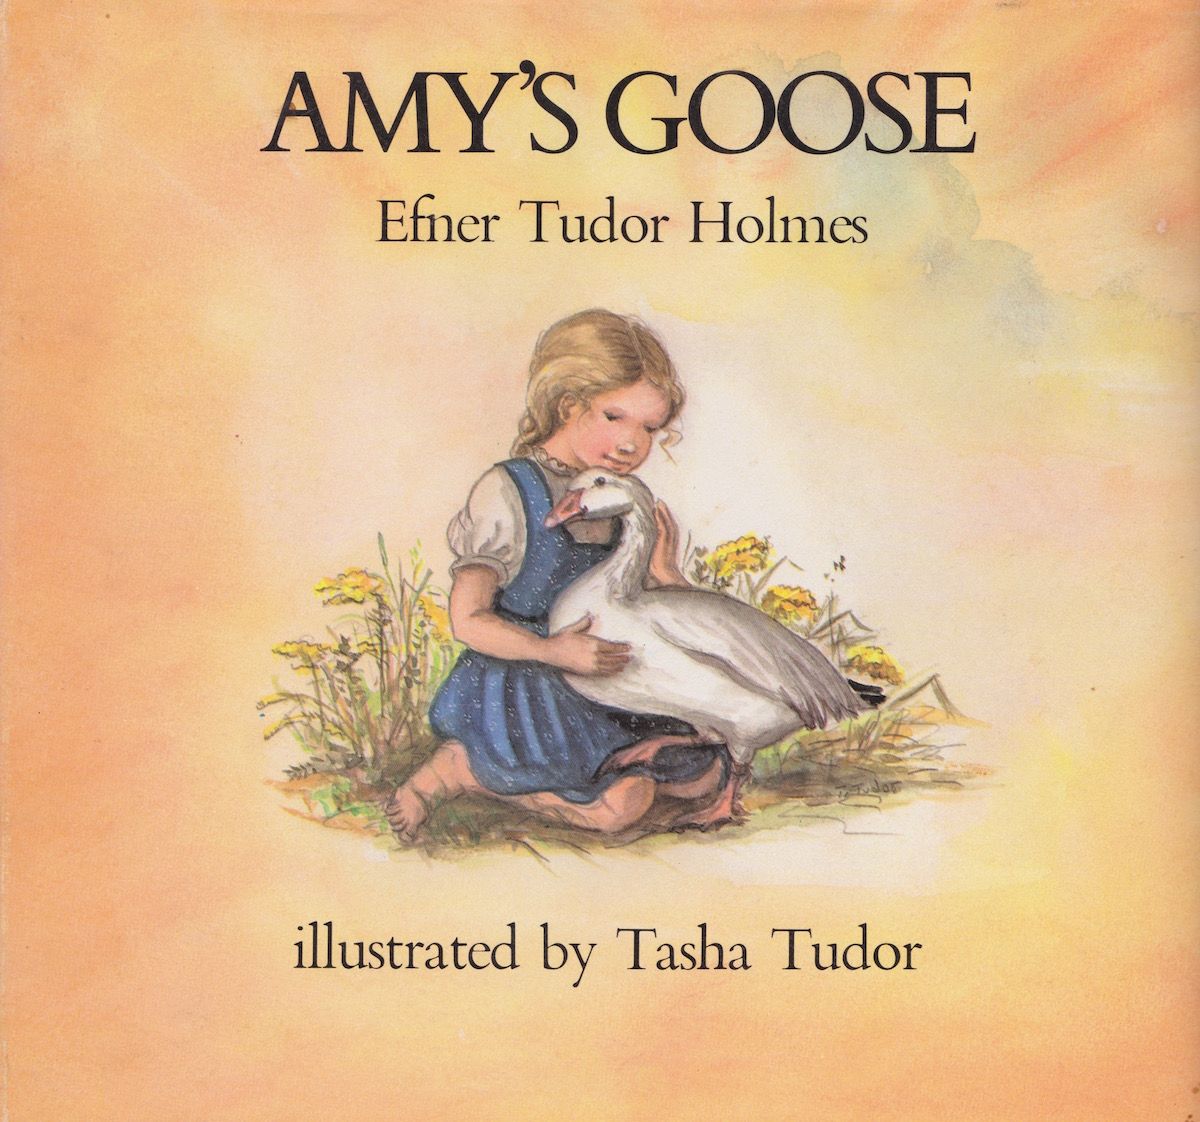 Amys-goose-cover